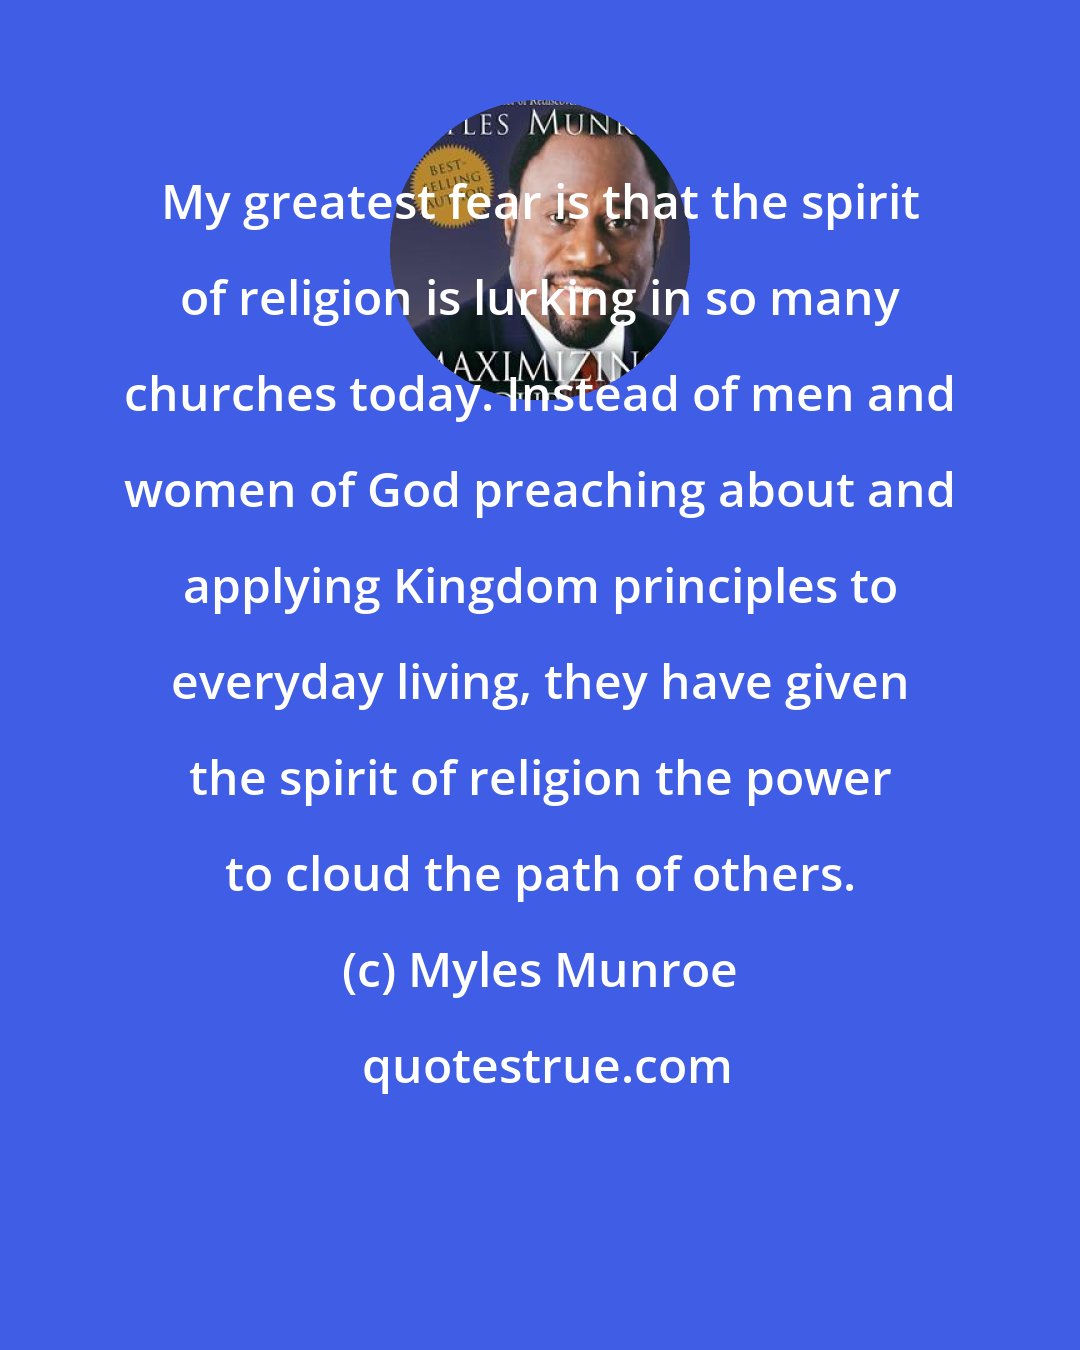 Myles Munroe: My greatest fear is that the spirit of religion is lurking in so many churches today. Instead of men and women of God preaching about and applying Kingdom principles to everyday living, they have given the spirit of religion the power to cloud the path of others.